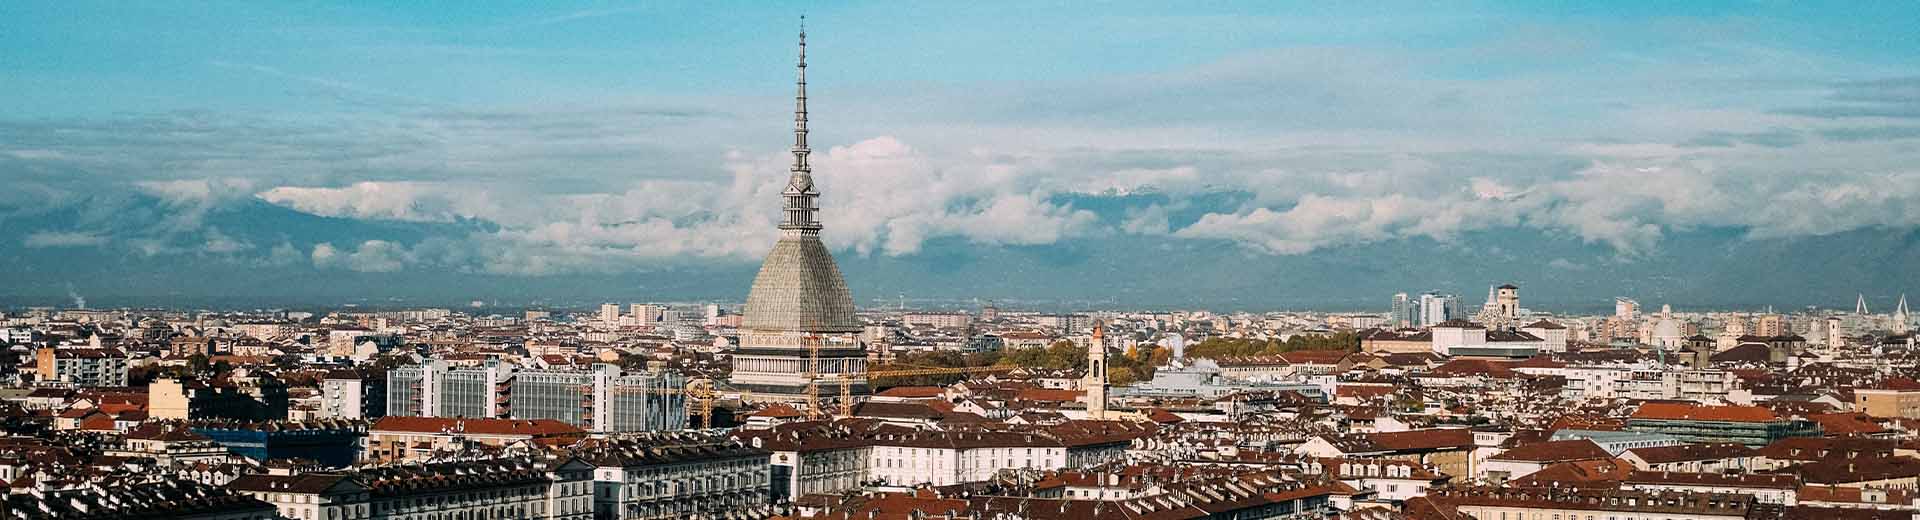 Beautiful city of Turin on a clear summer's day. Cathedrals and church spires are abundant. 